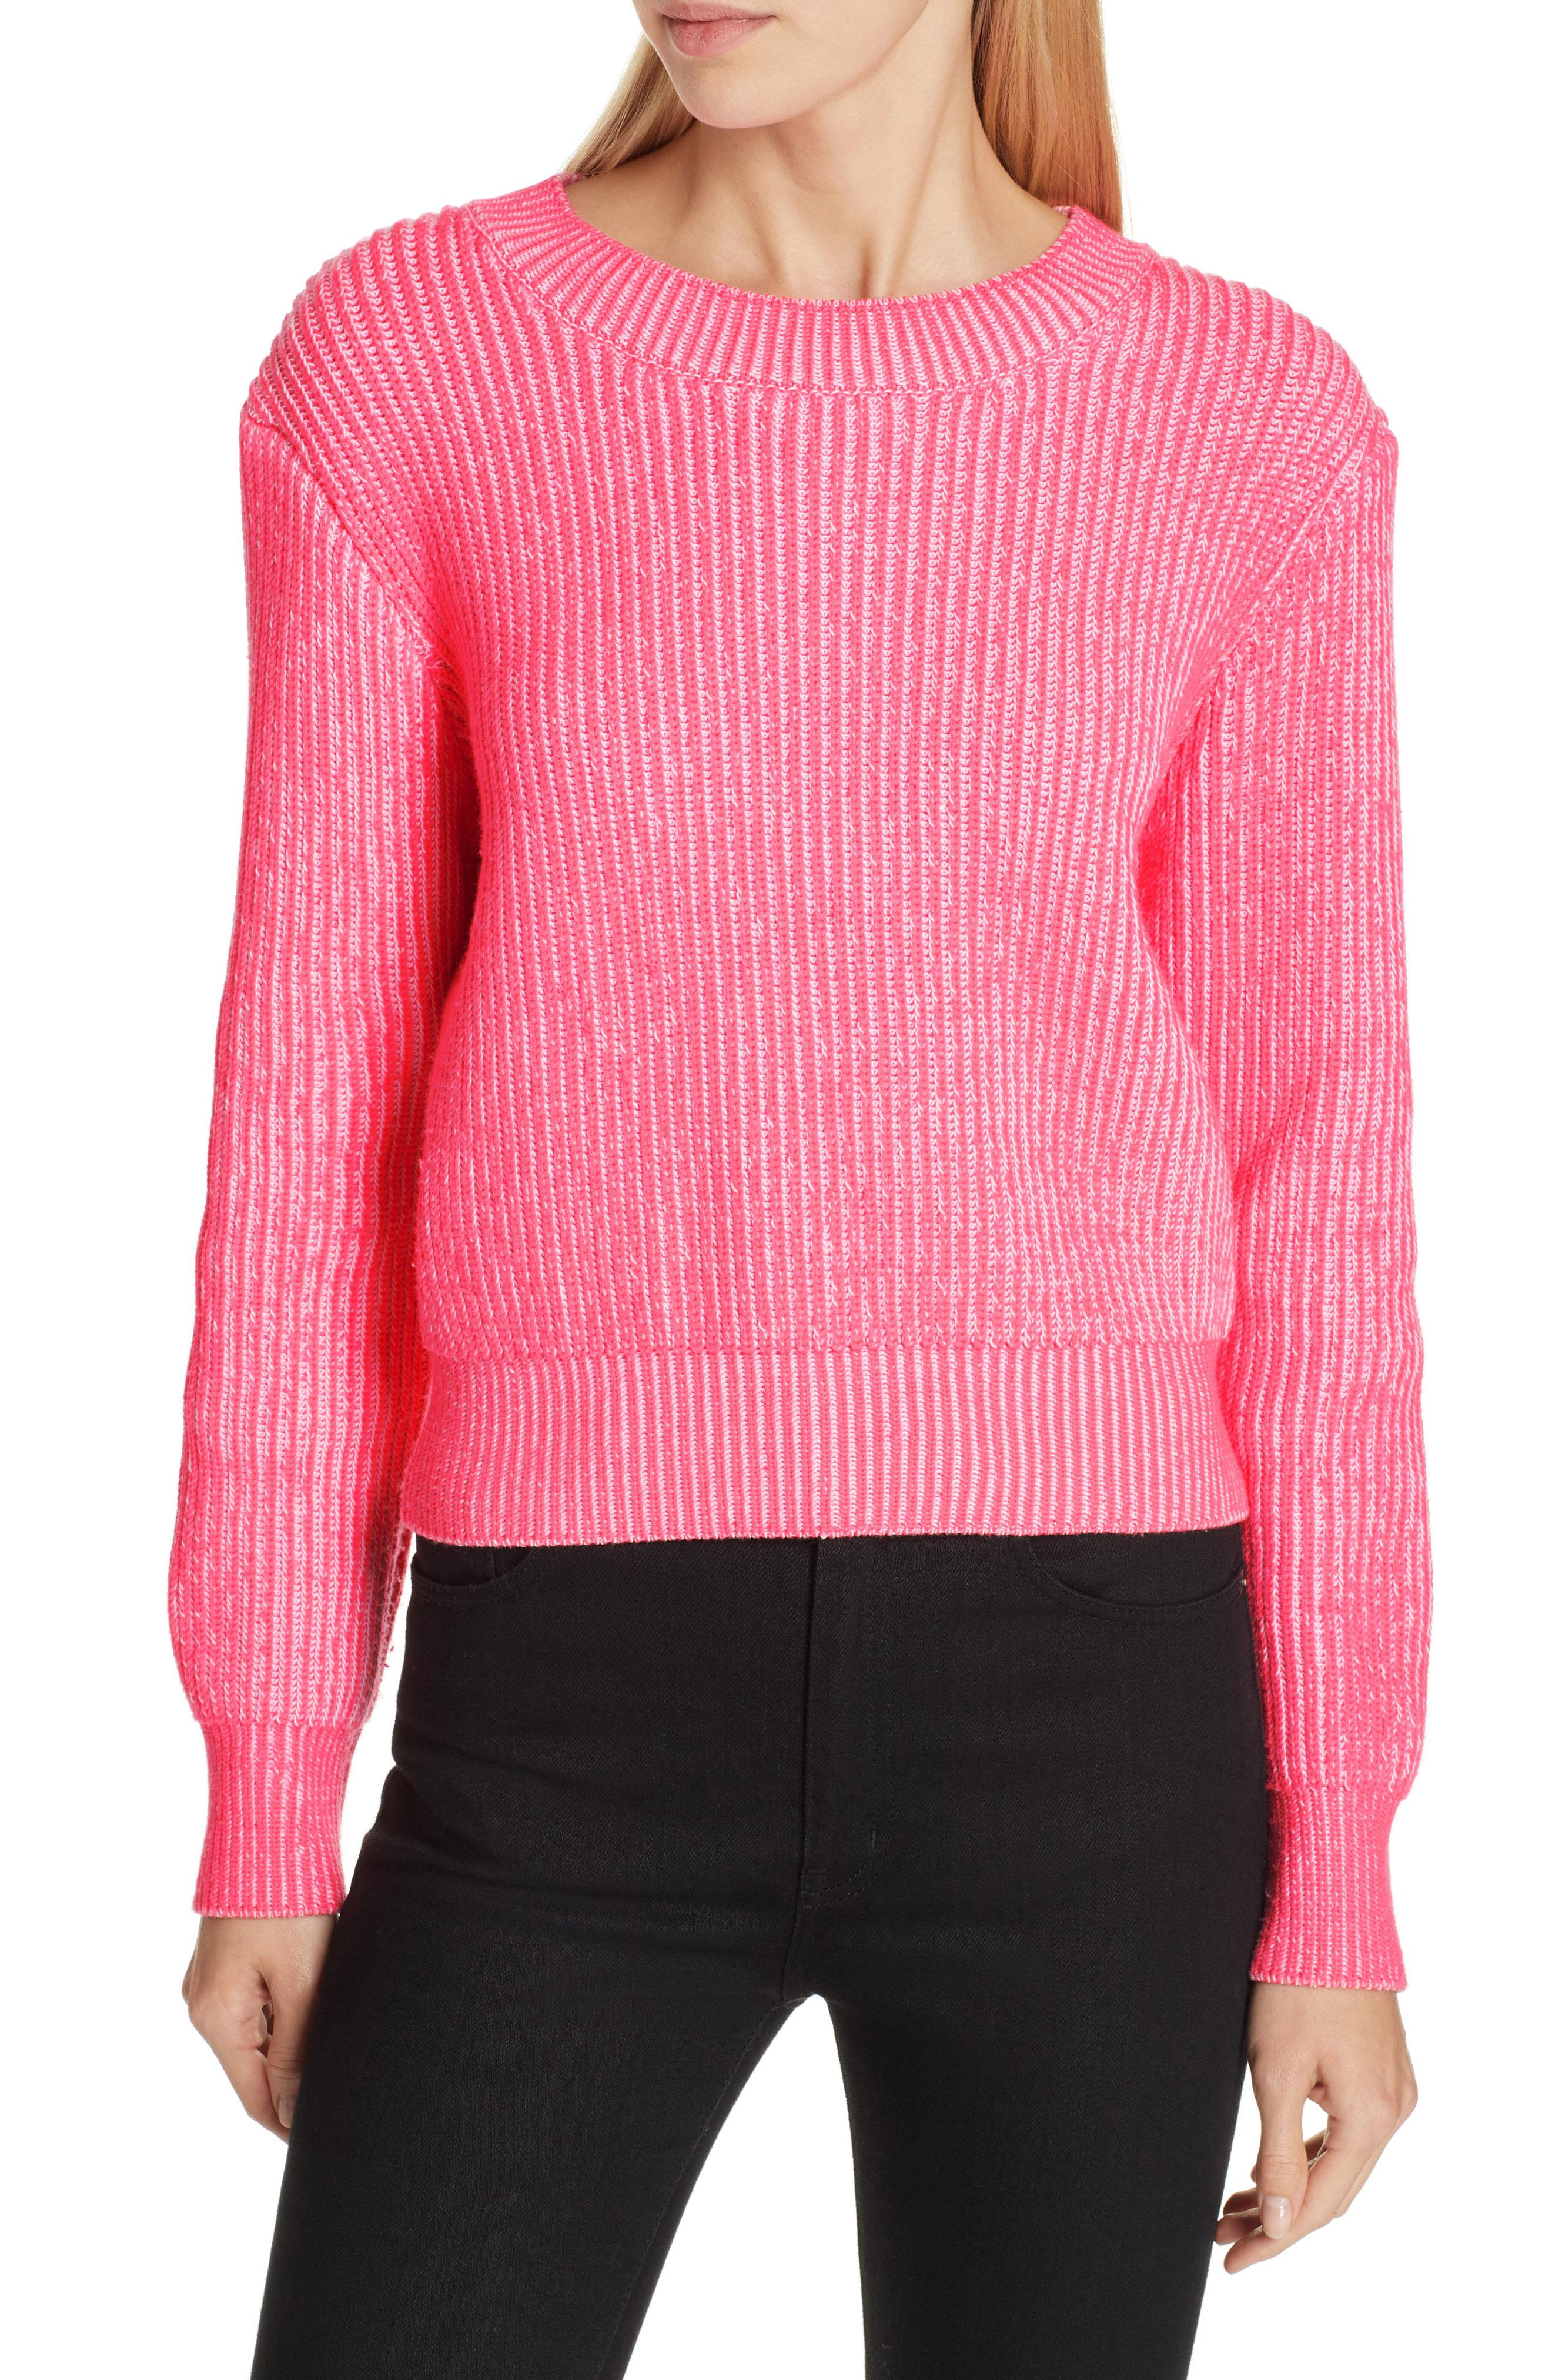 Lyst - MILLY Plaited Rib Sweater in Pink